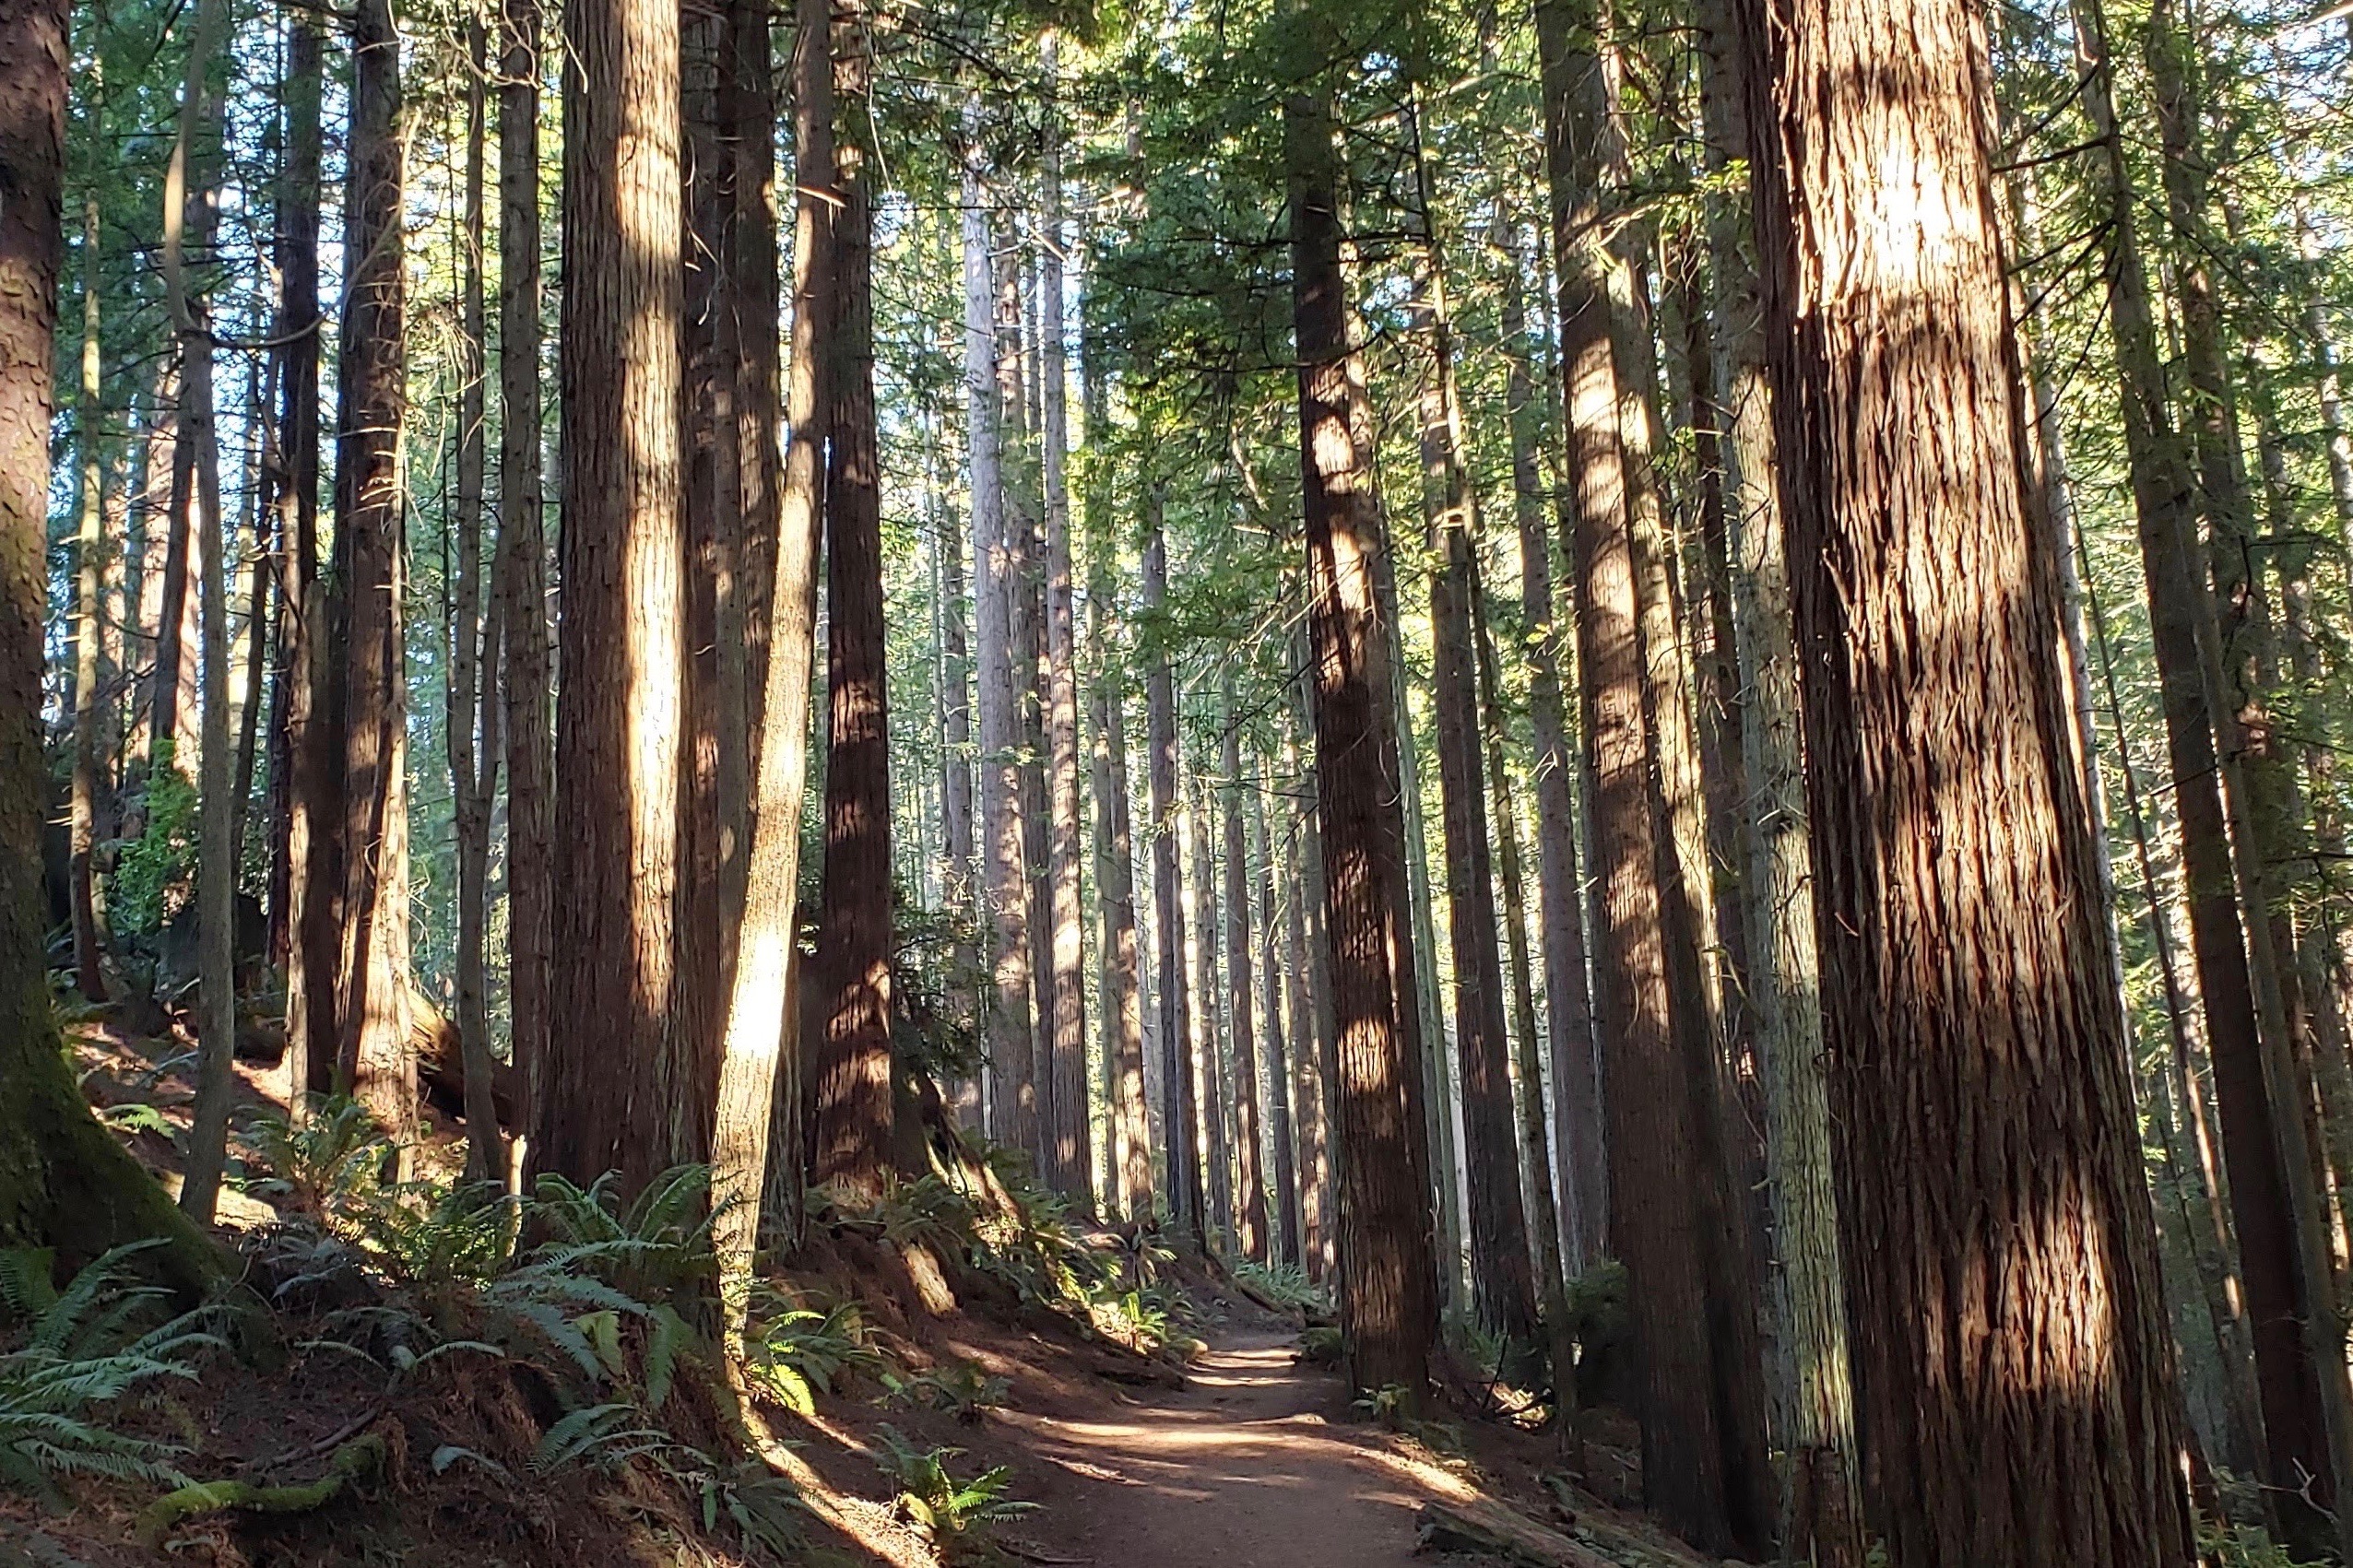 A path meanders through a redwood forest in Northern California.